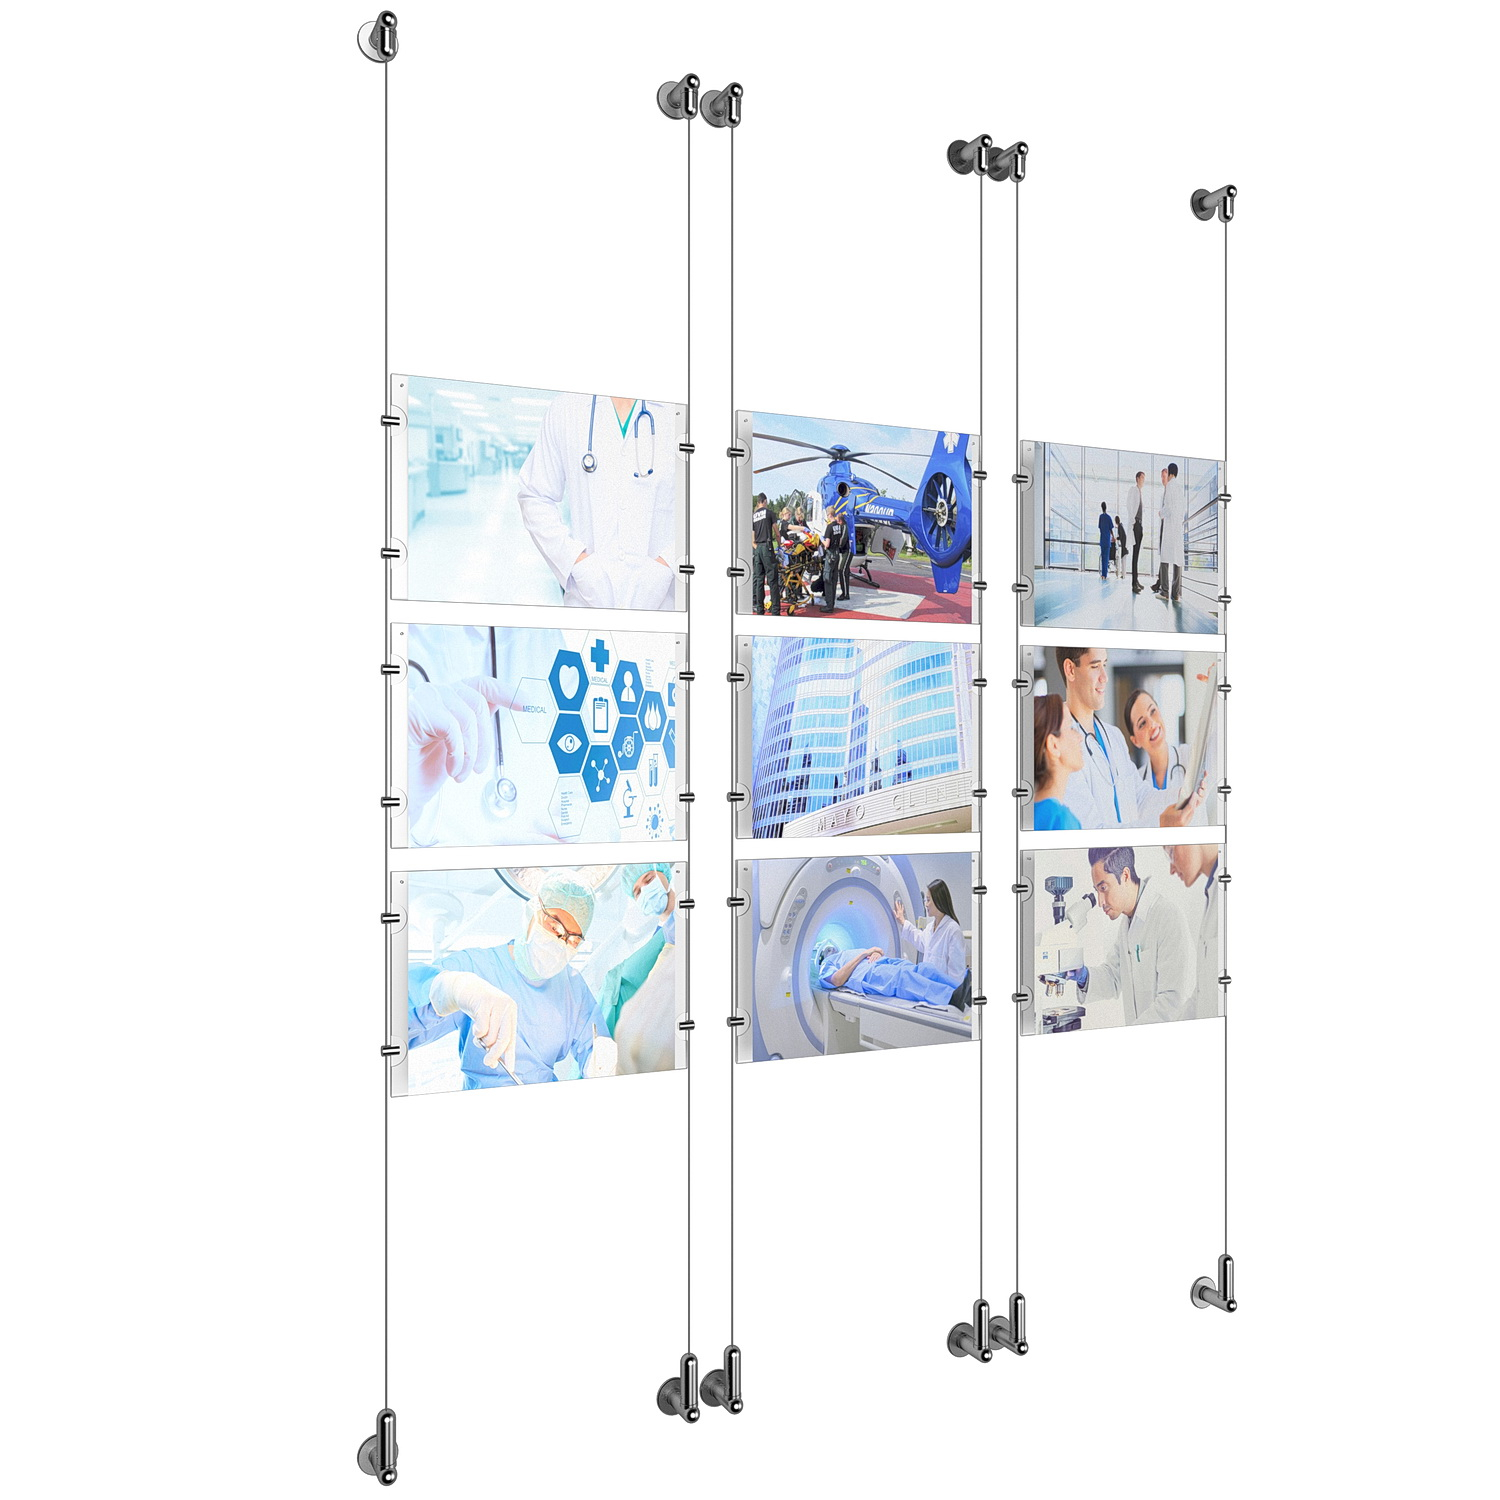 (9) 11'' Width x 8-1/2'' Height Clear Acrylic Frame & (6) Wall-to-Wall Aluminum Clear Anodized Cable Systems with (36) Single-Sided Panel Grippers